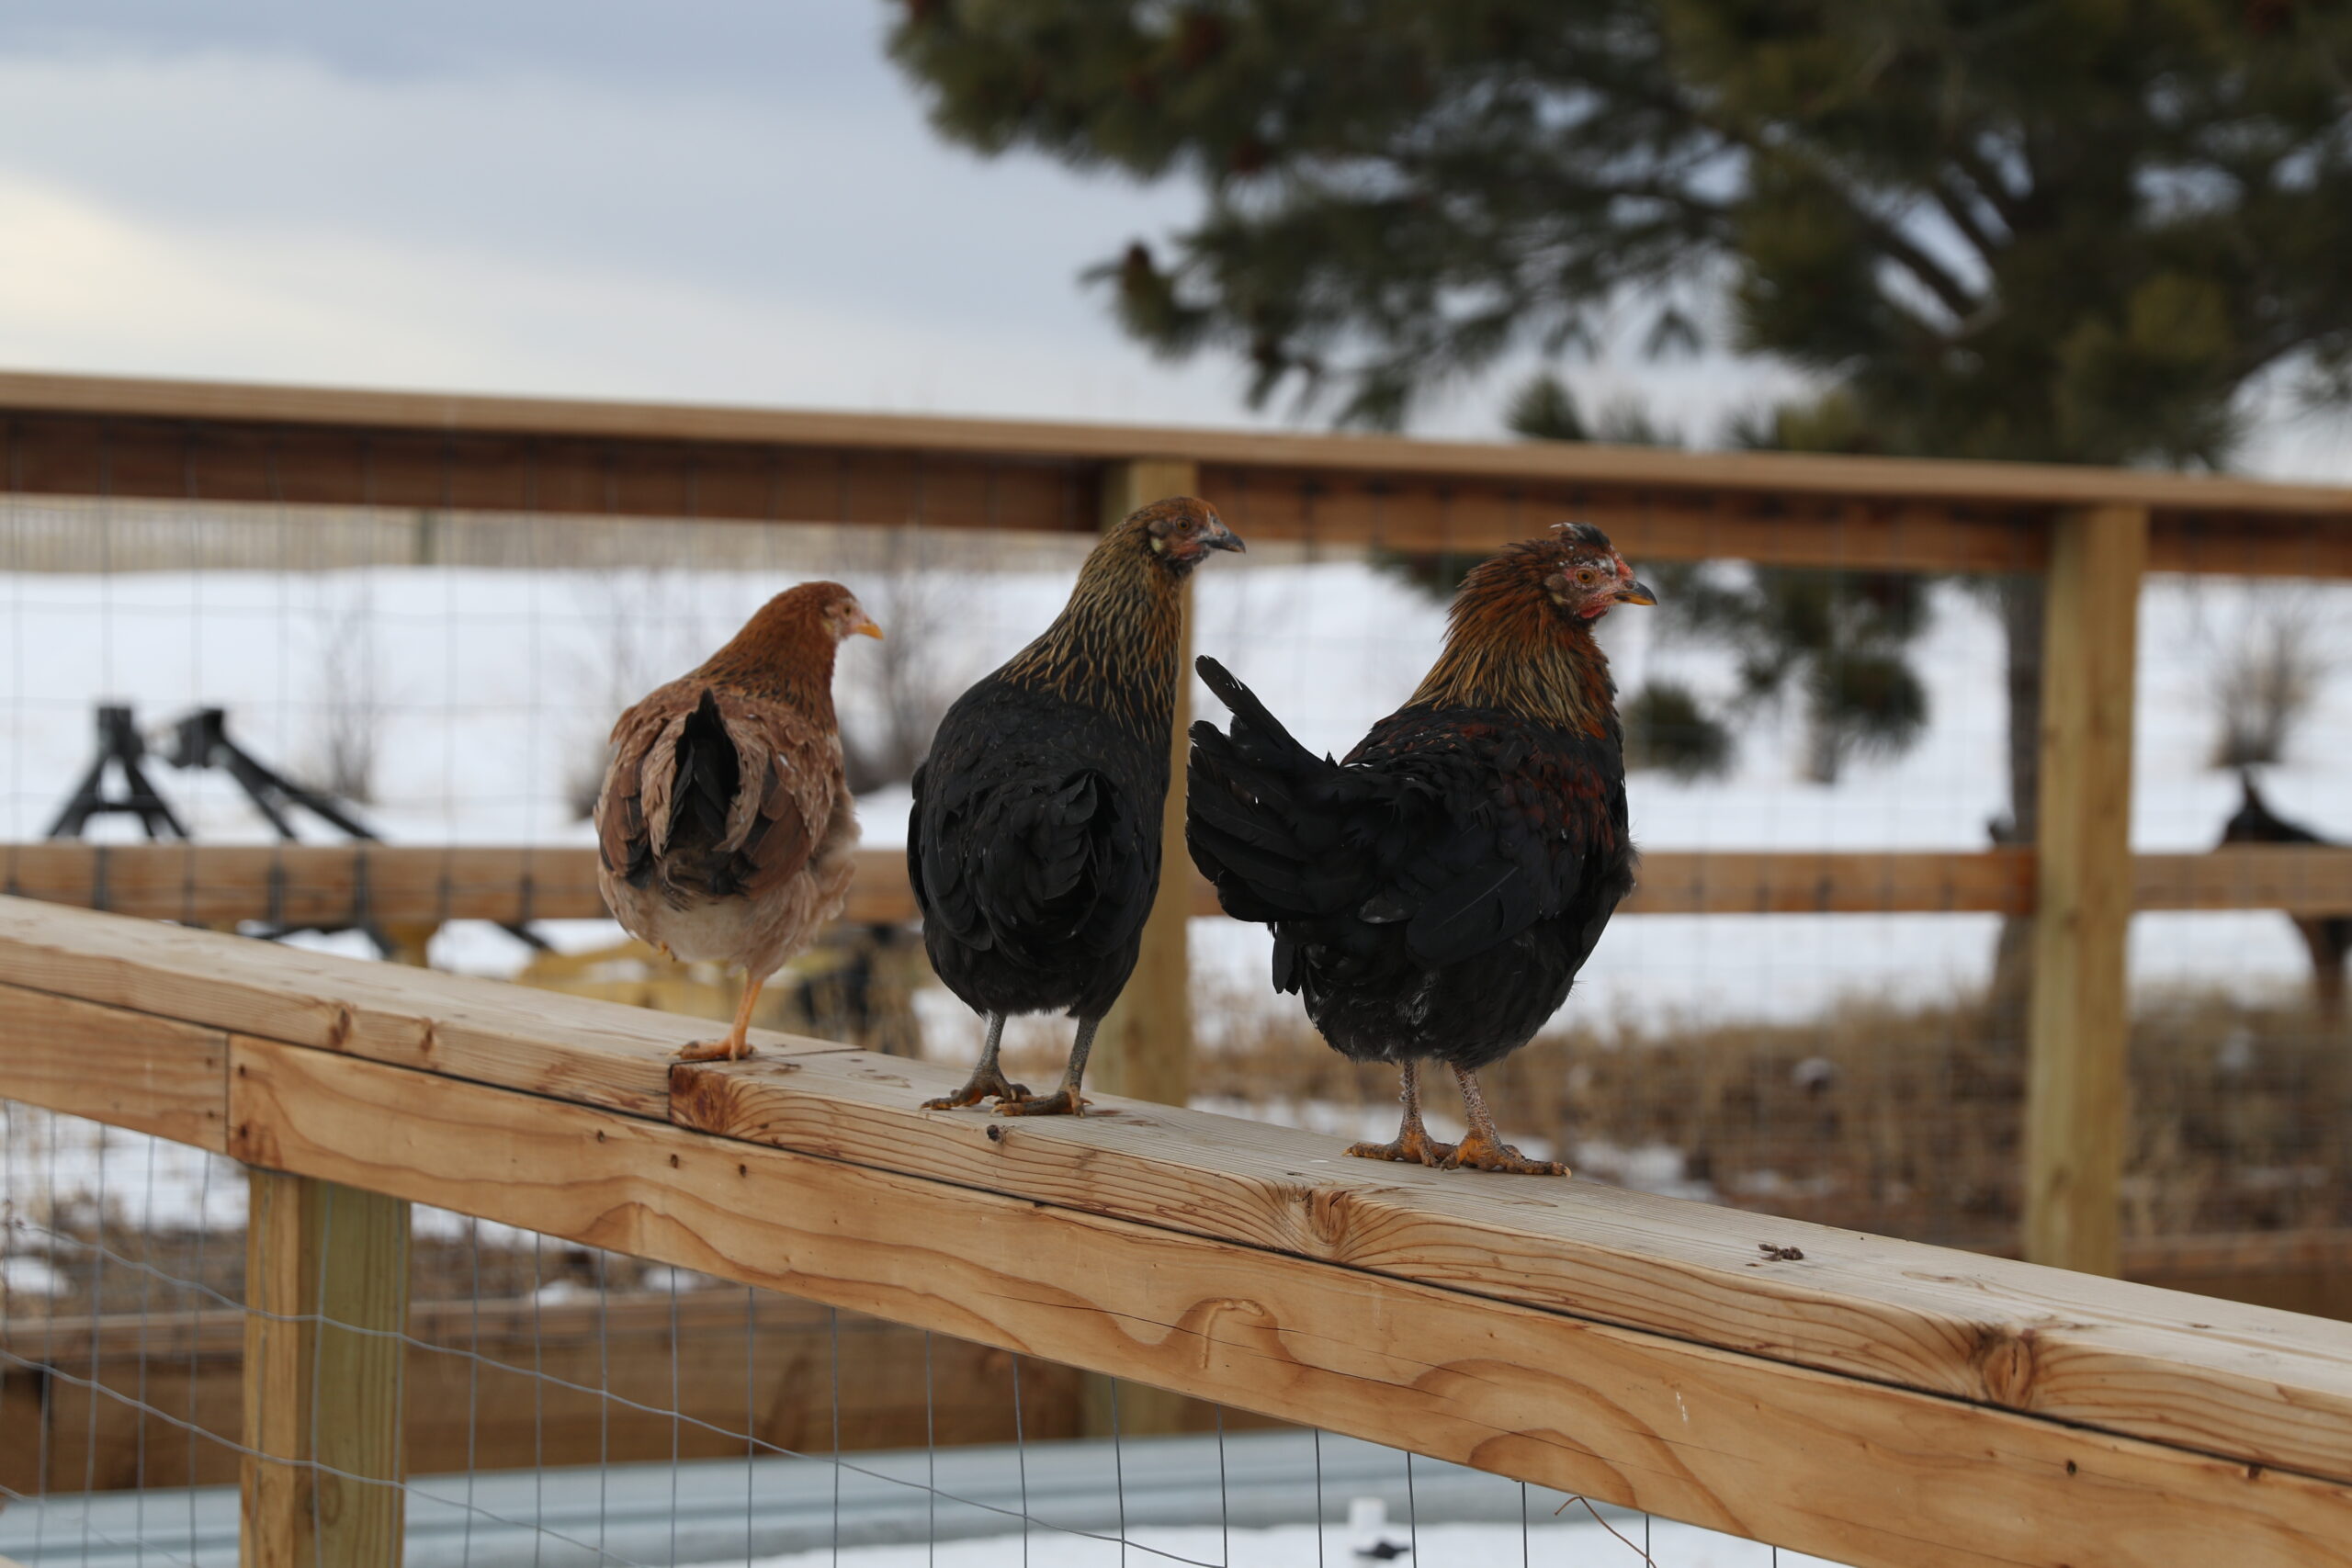 The Nutritional Needs of Chickens